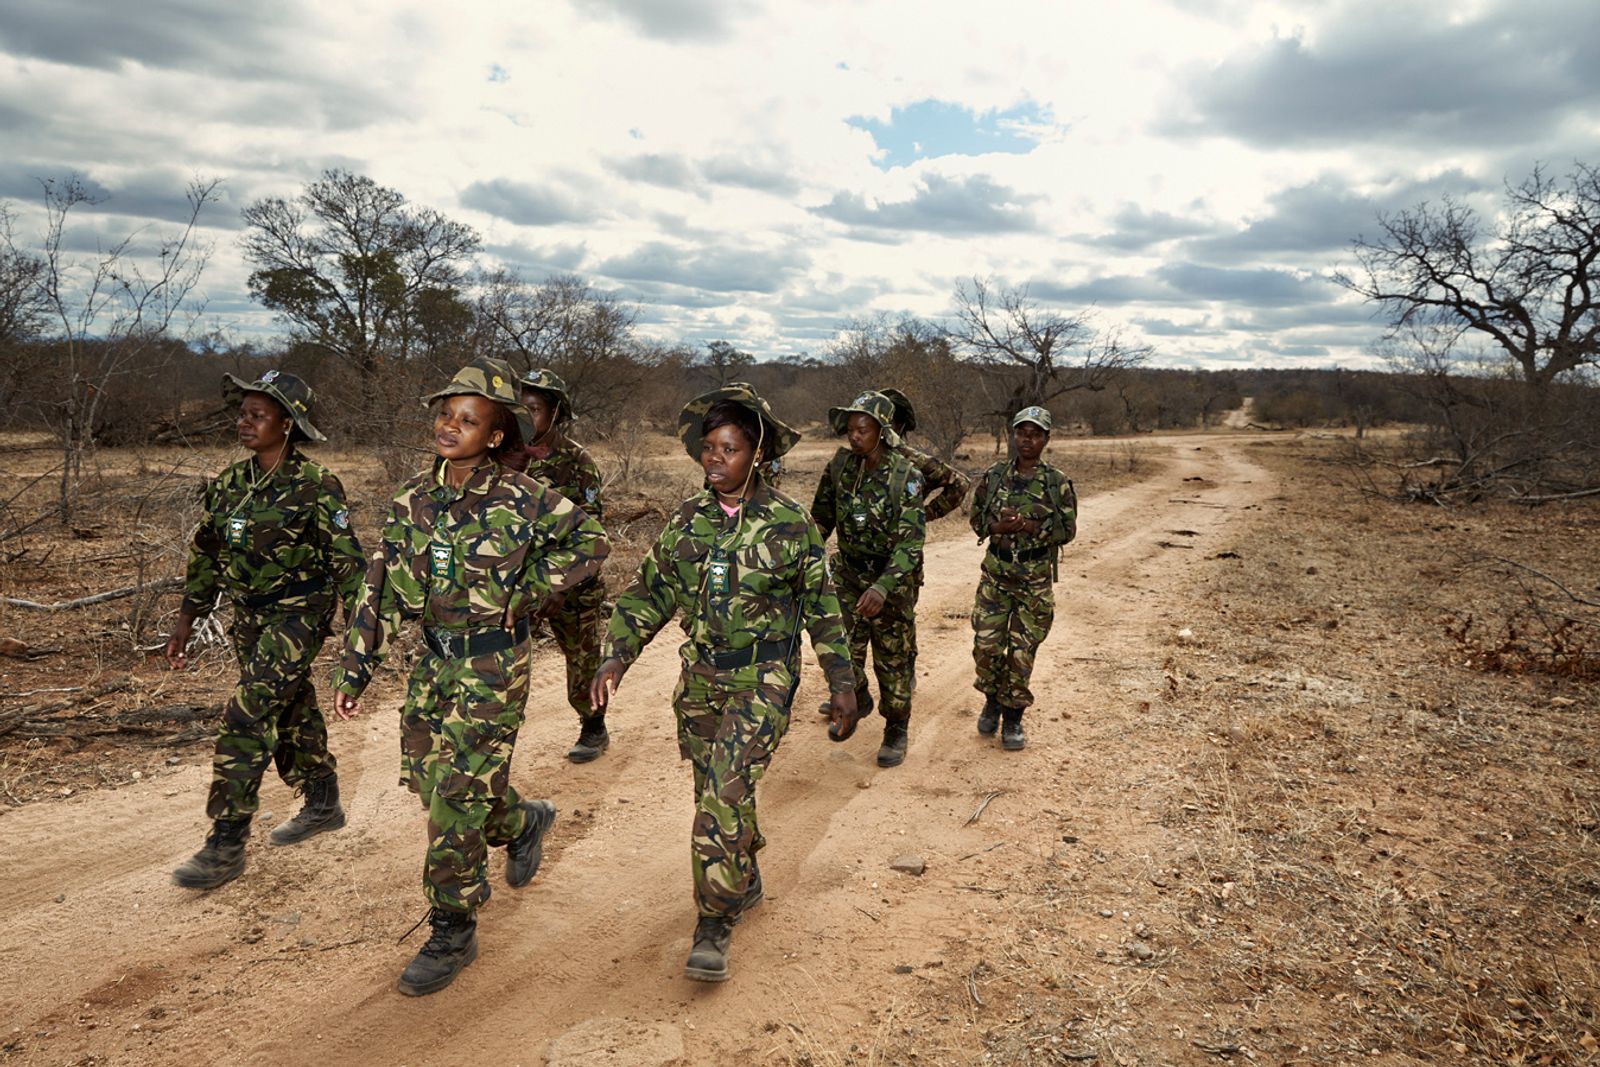 © Julia Gunther - The Black Mambas on patrol, Balule Nature Reserve, South Africa, 2015